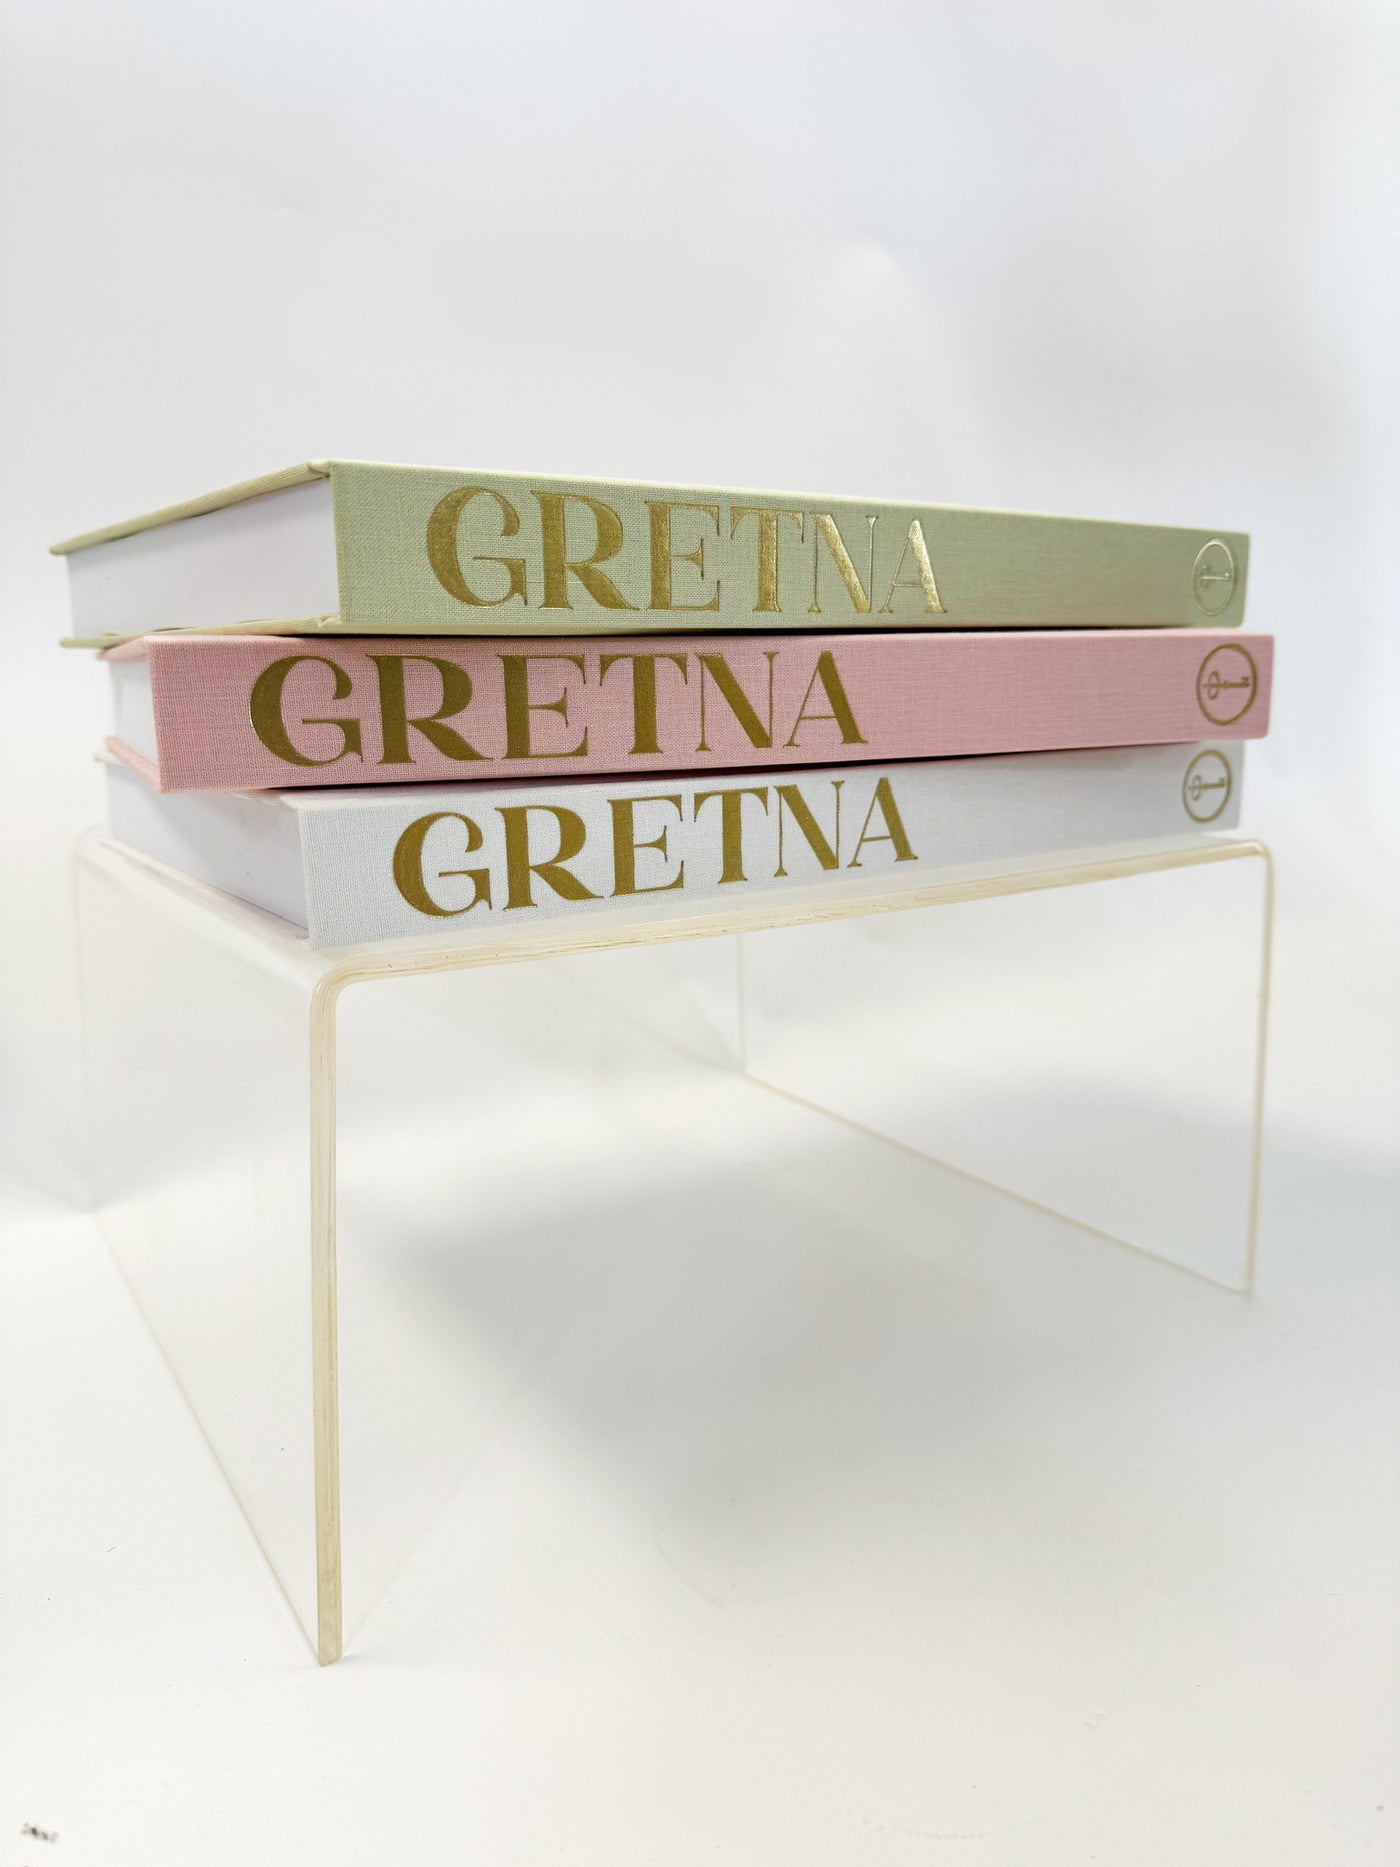 Gretna Coffee Table Book